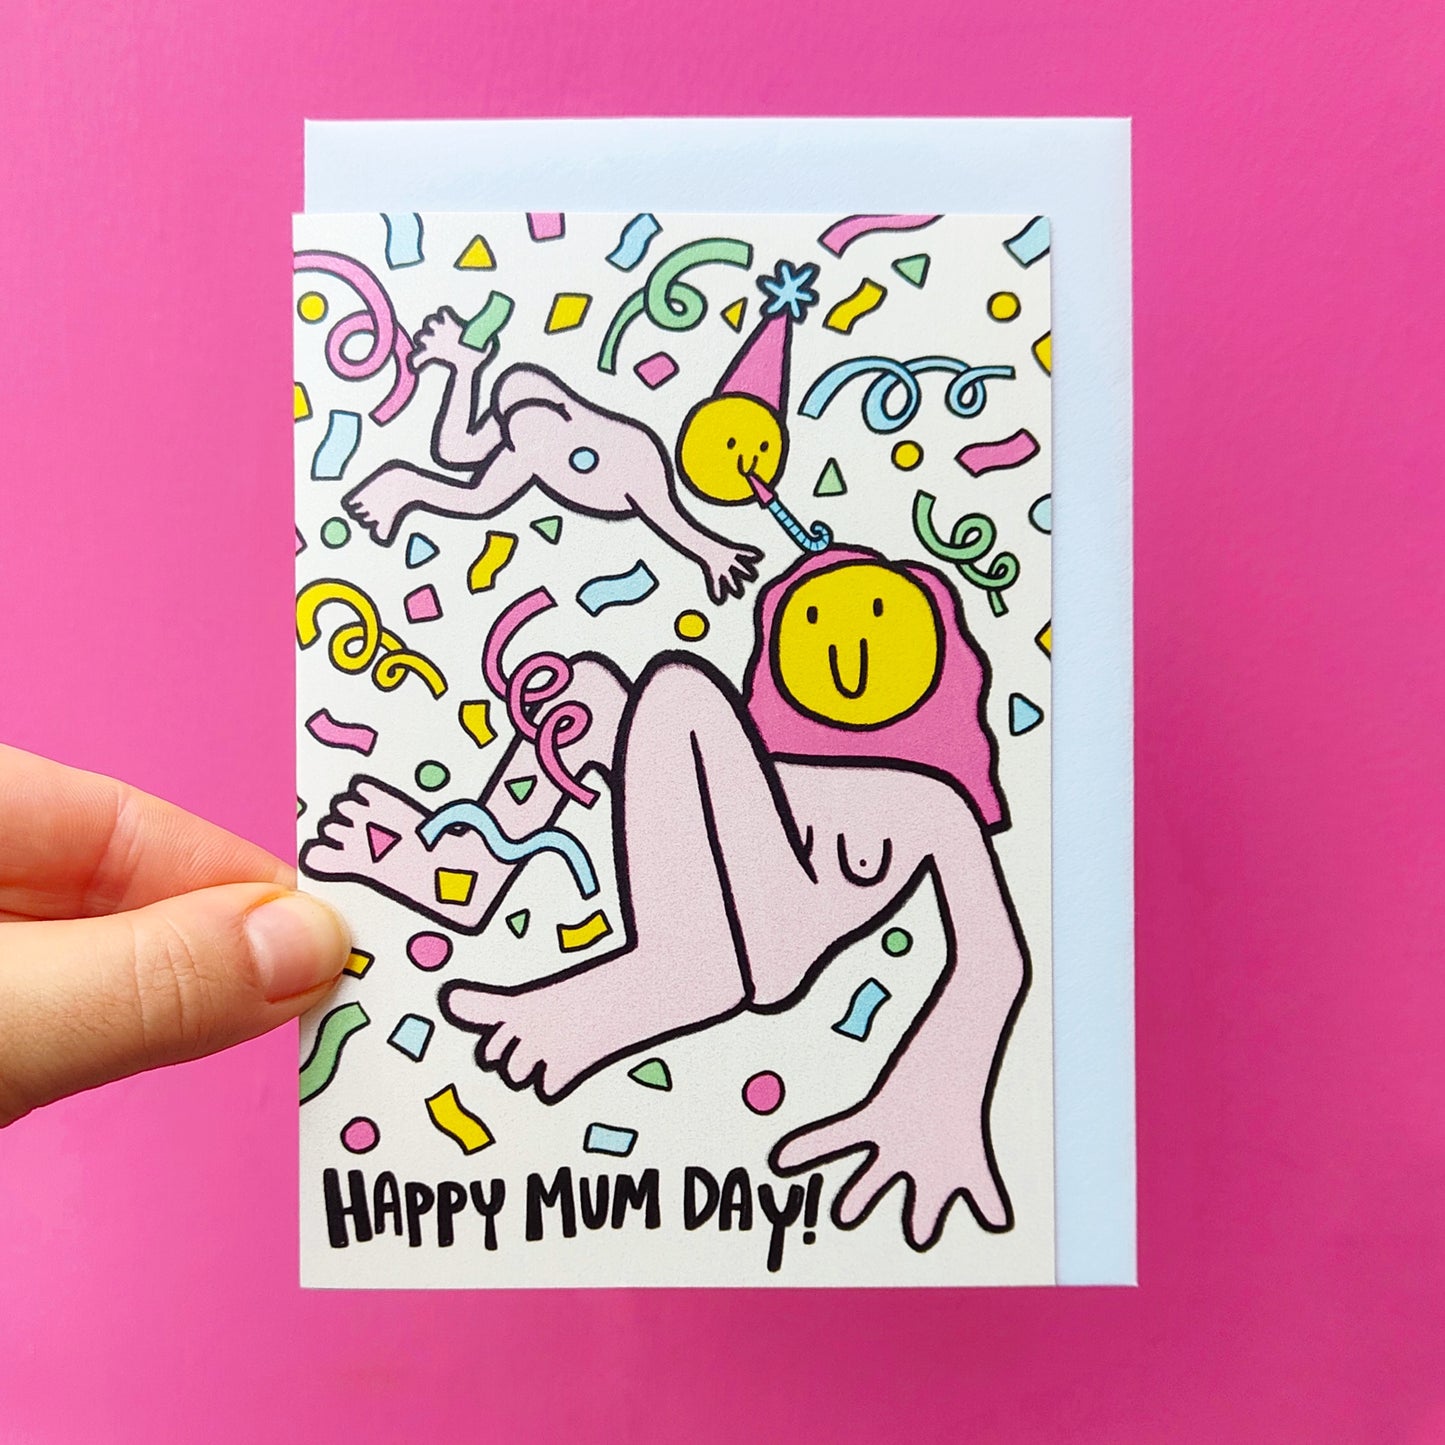 Happy Mum Day - New Baby Mother’s Day Greetings Card